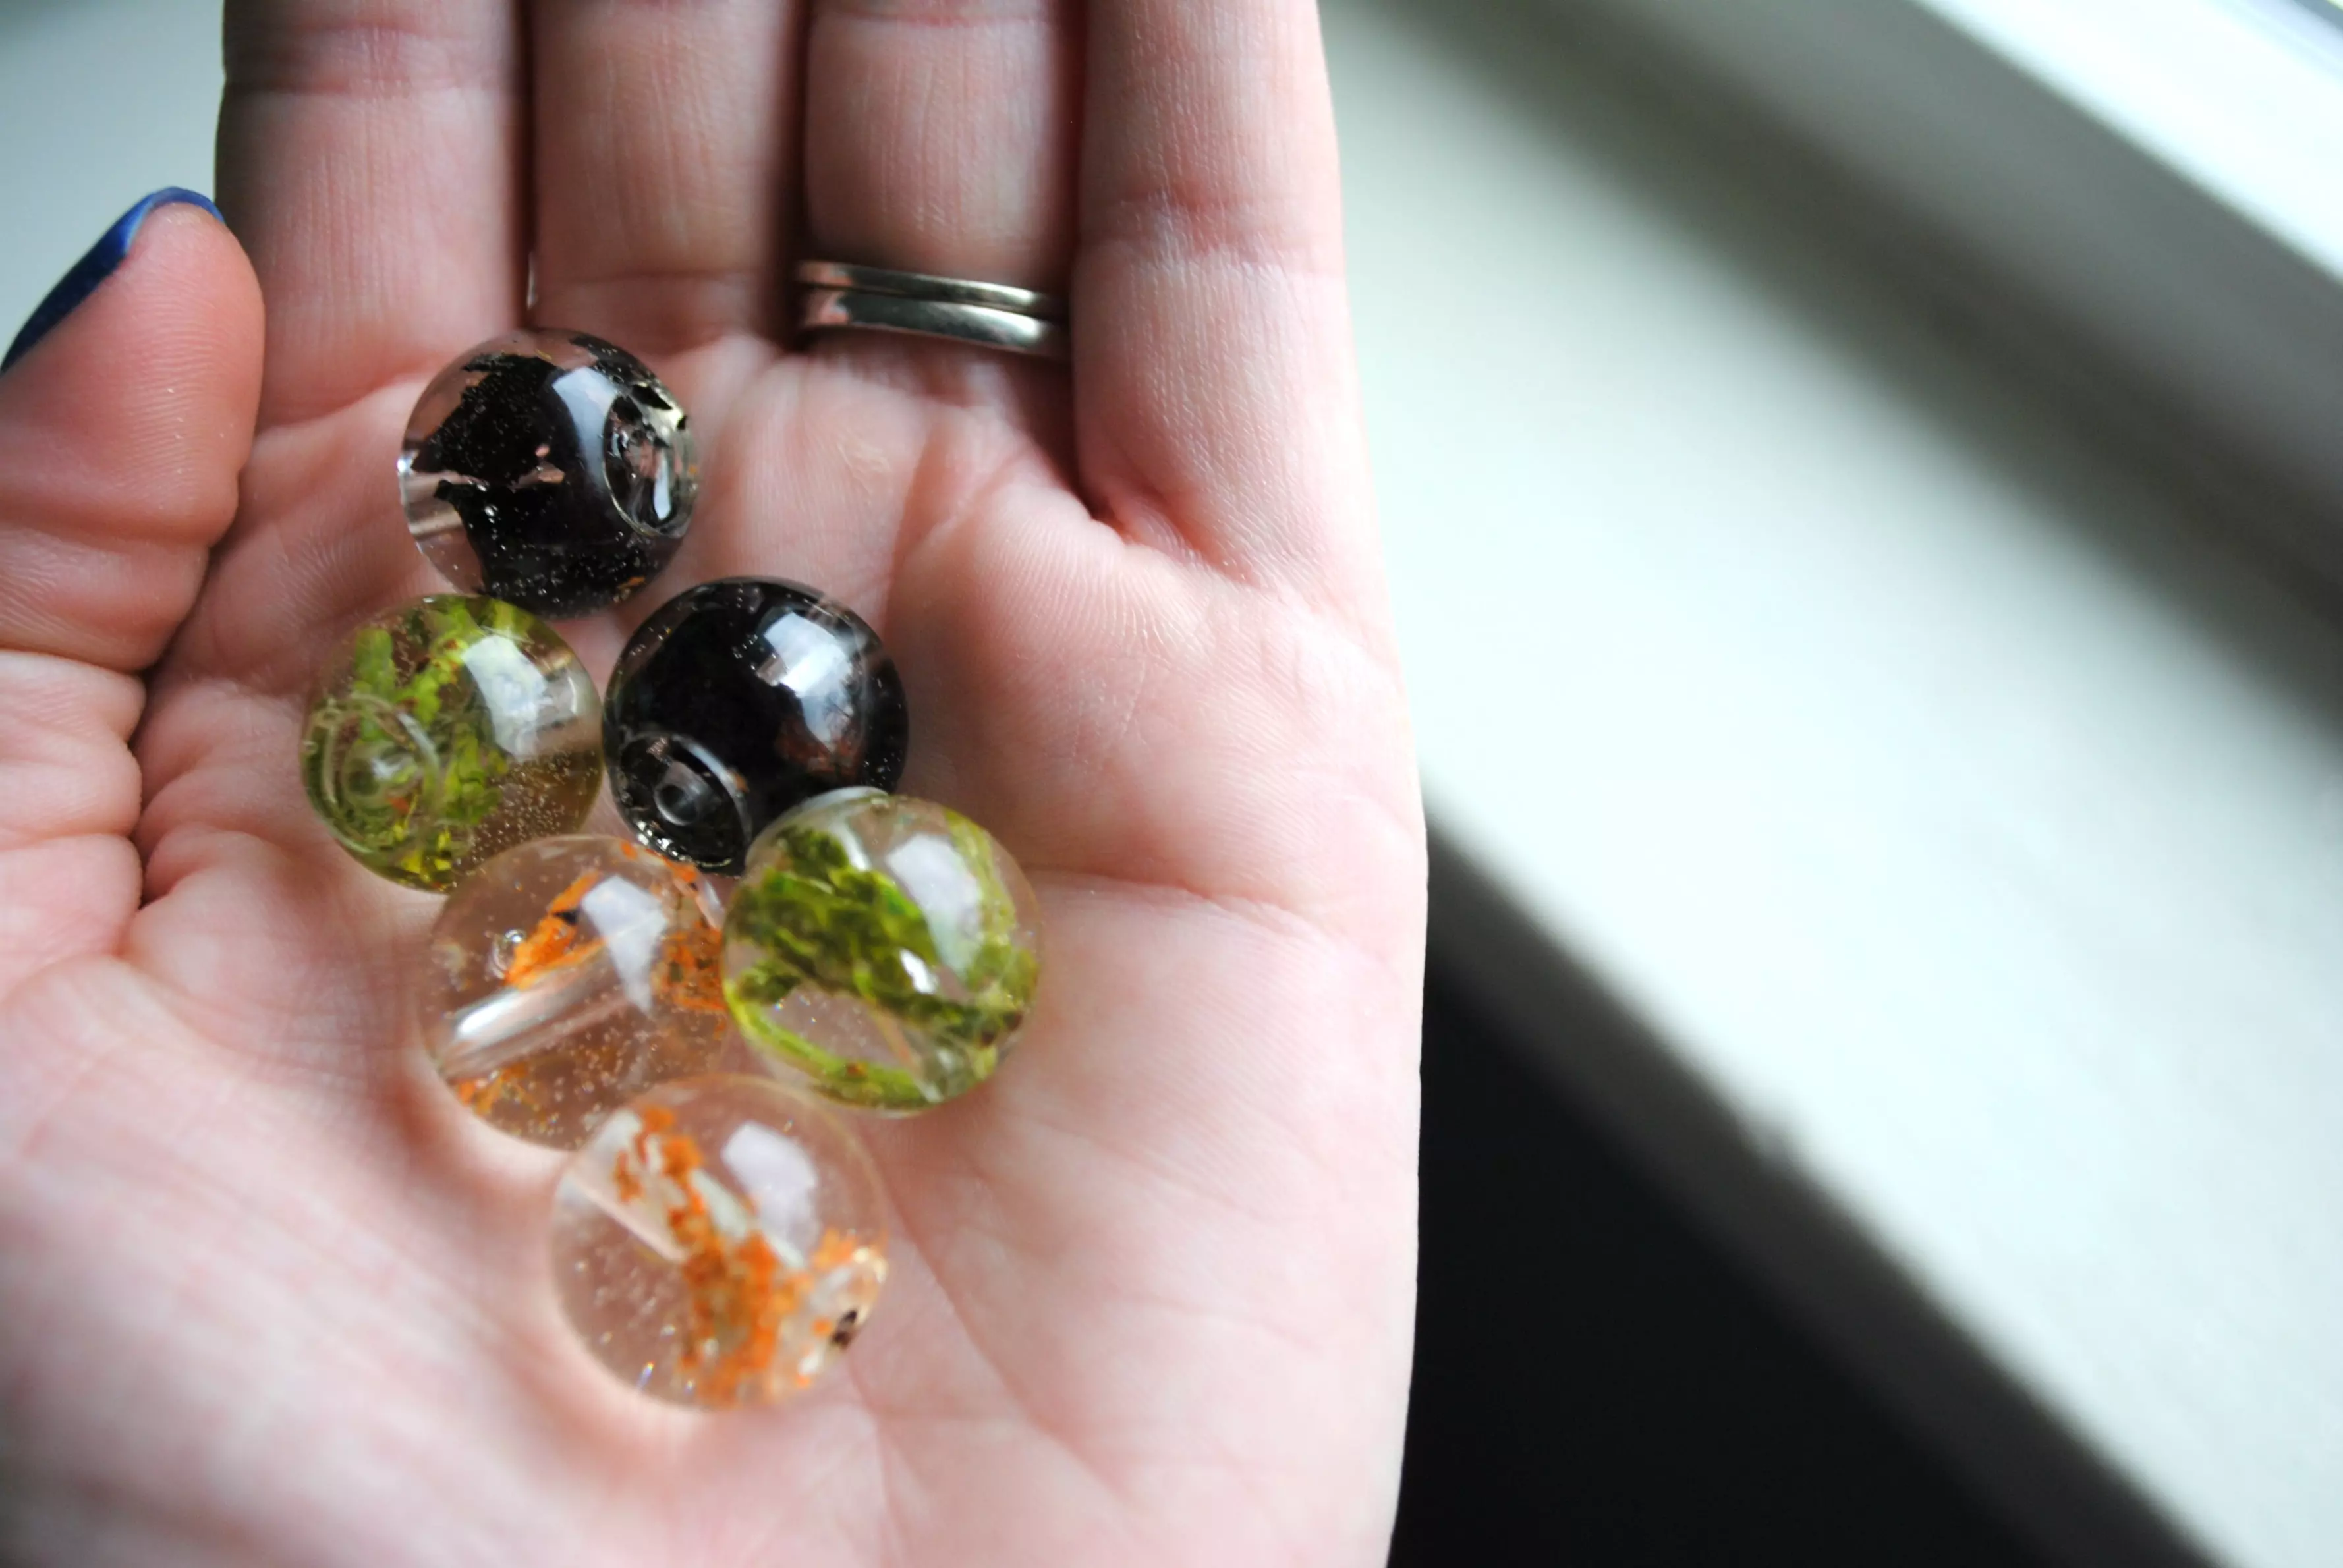 How to Make Resin Jewelry with Botanicals: Tutorial